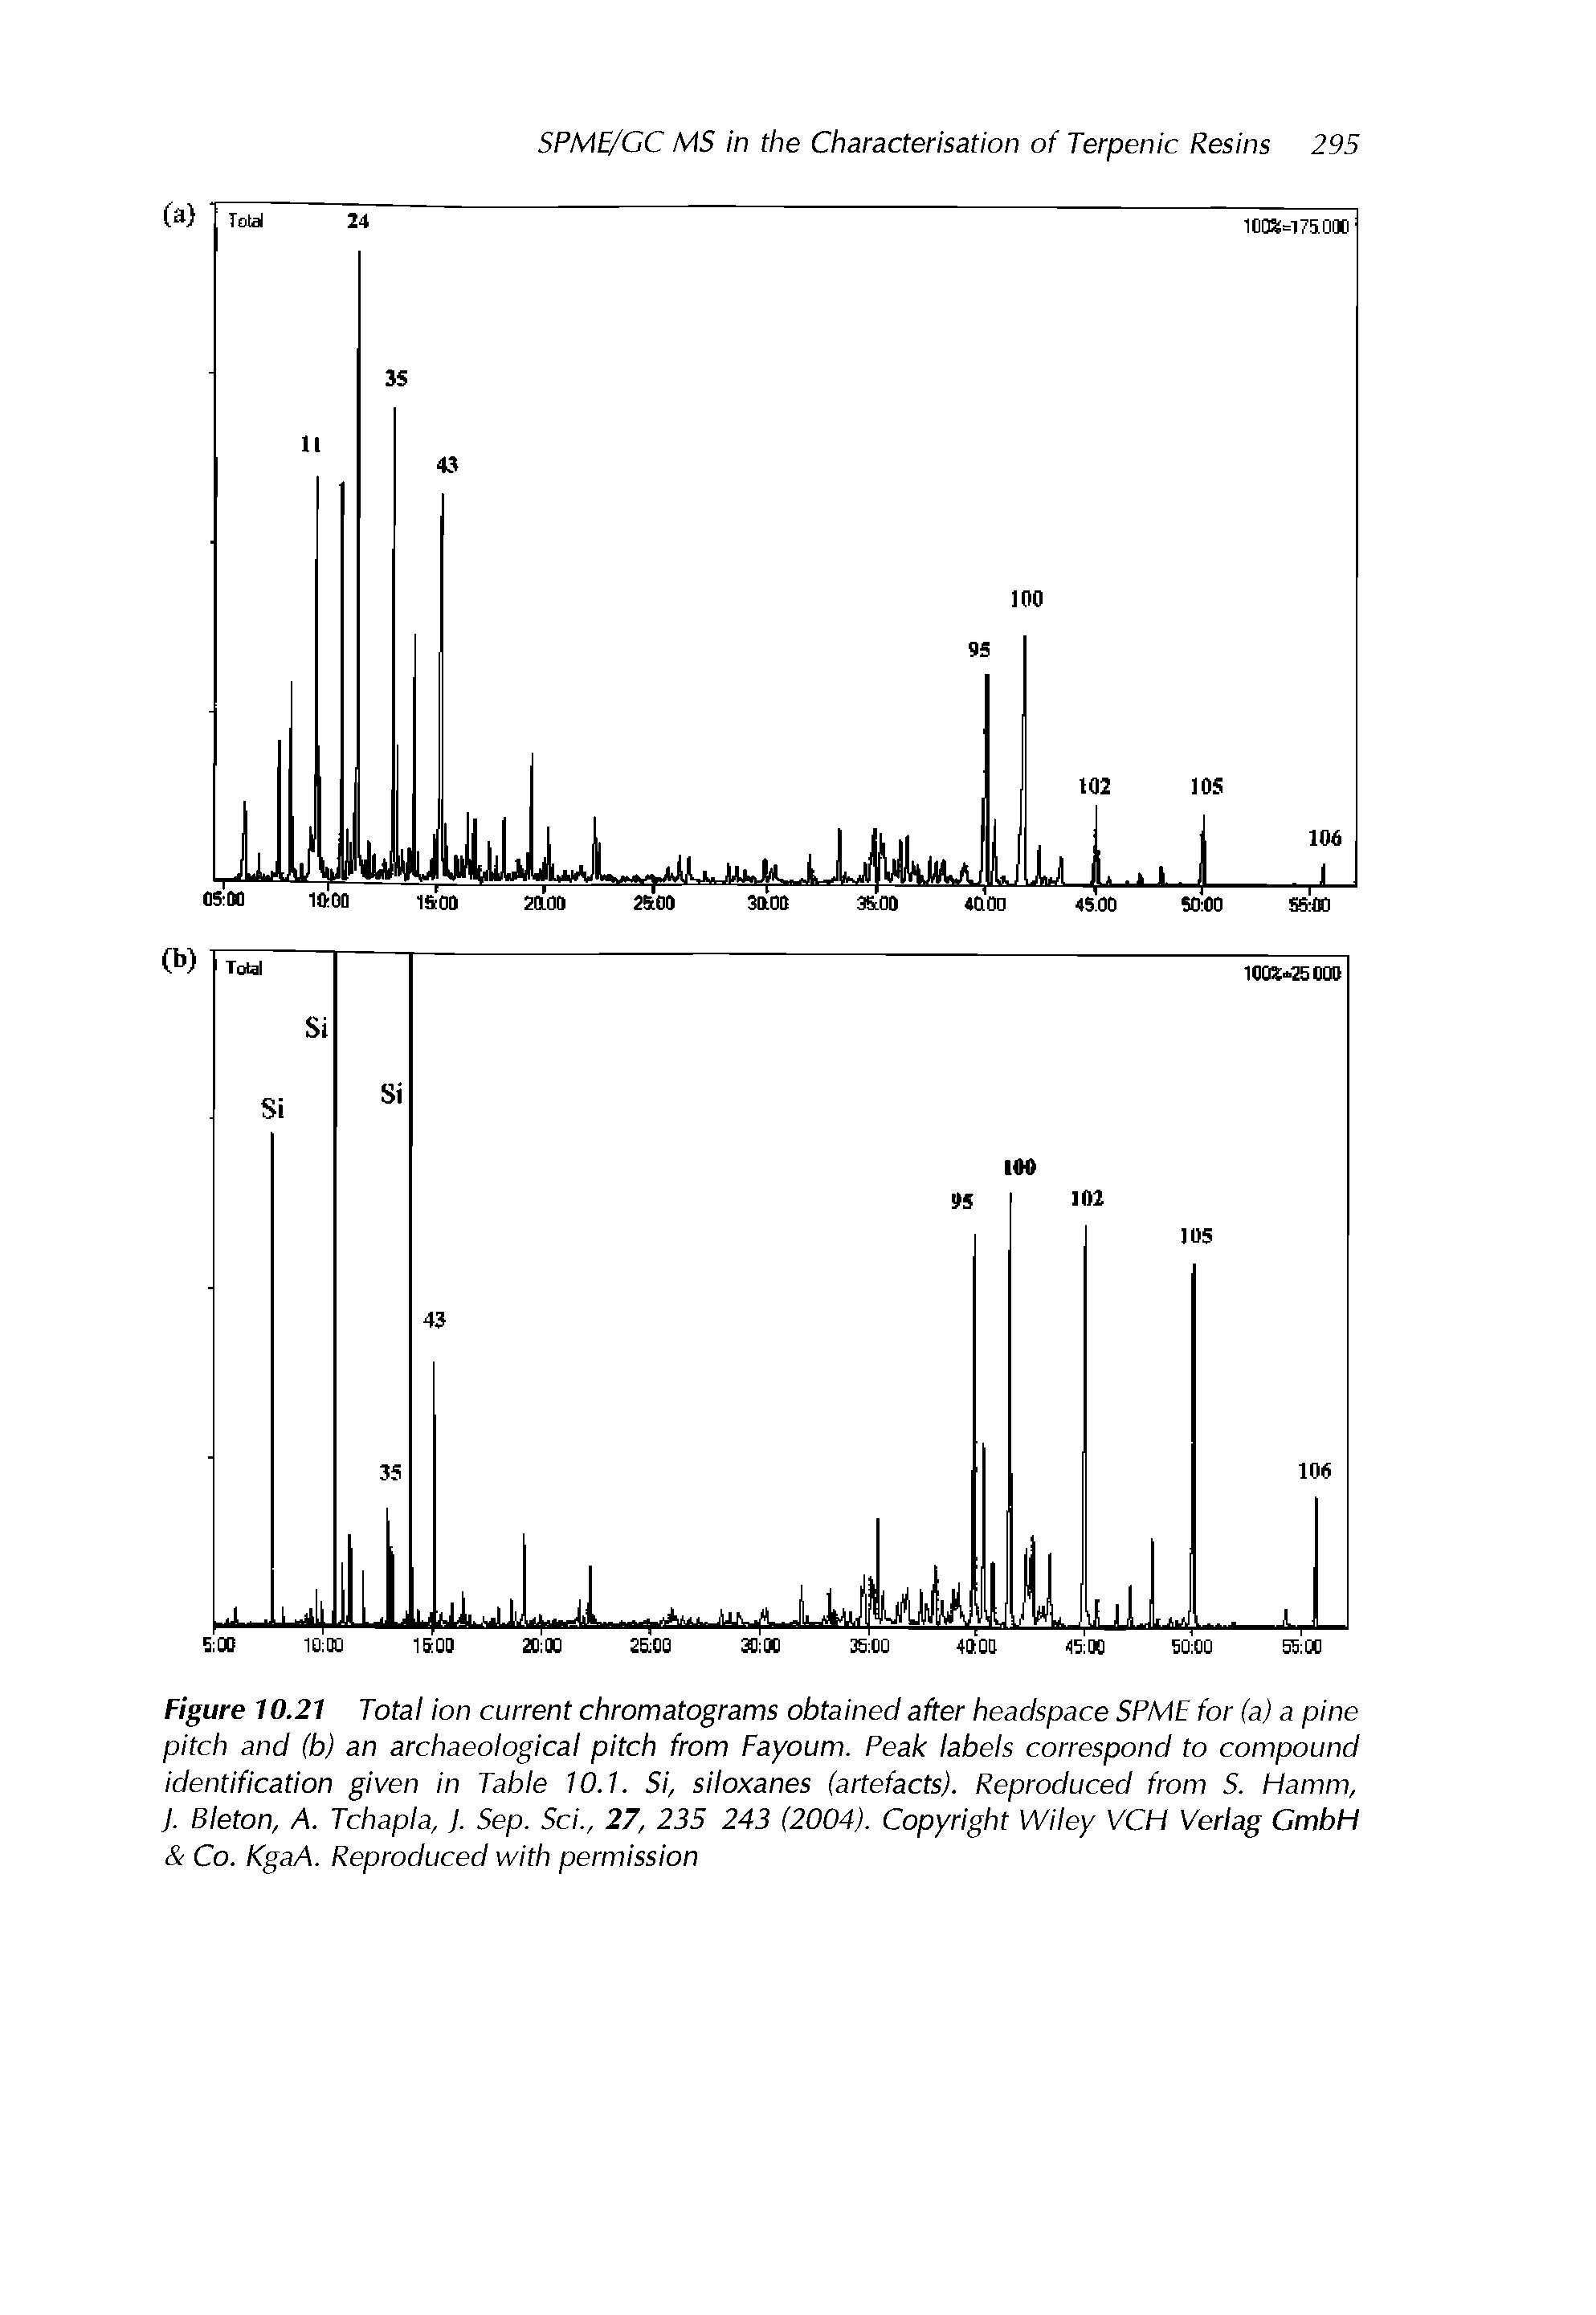 Figure 10.21 Total ion current chromatograms obtained after headspace SPME for (a) a pine pitch and (b) an archaeological pitch from Fayoum. Peak labels correspond to compound identification given in Table 10.1. Si, siloxanes (artefacts). Reproduced from S. Hamm, J. Bleton, A. Tchapla, J. Sep. Sci., 27, 235 243 (2004). Copyright Wiley VCH Verlag GmbH Co. KgaA. Reproduced with permission...